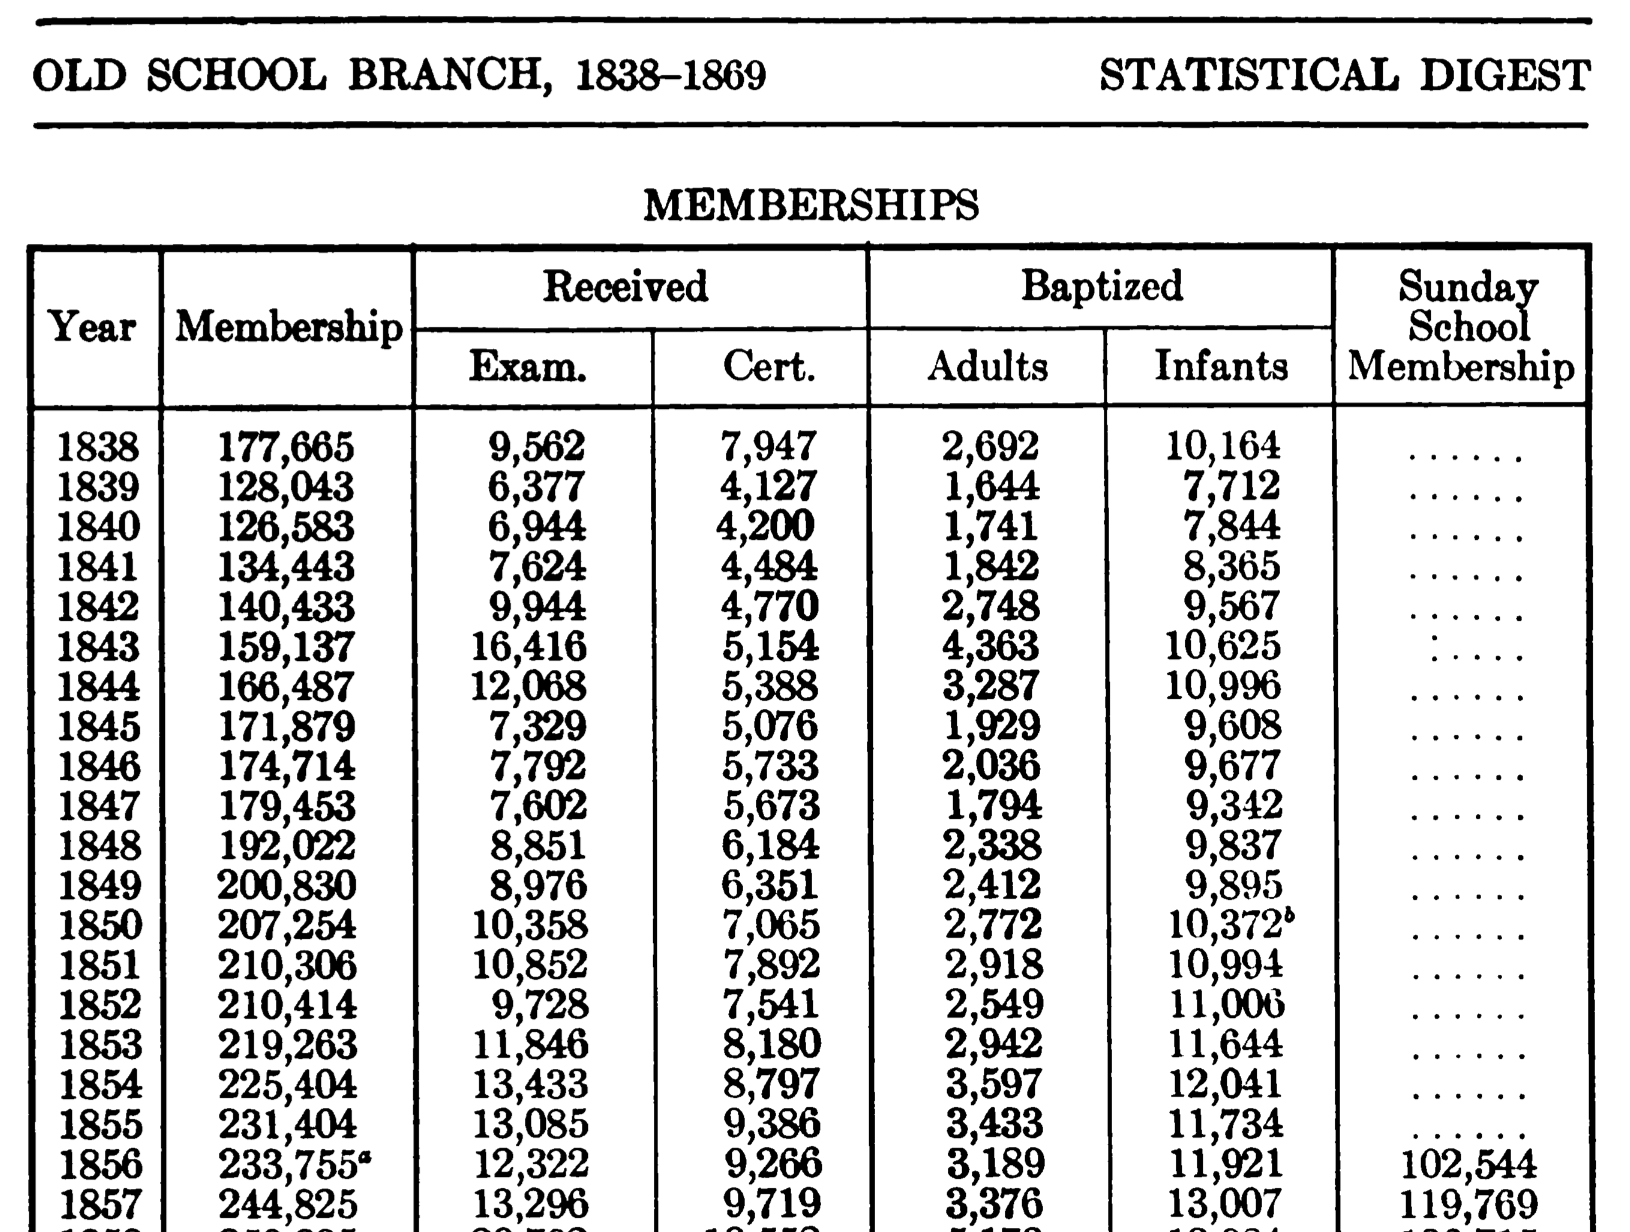 A table of membership figures from Weber, p. 12.